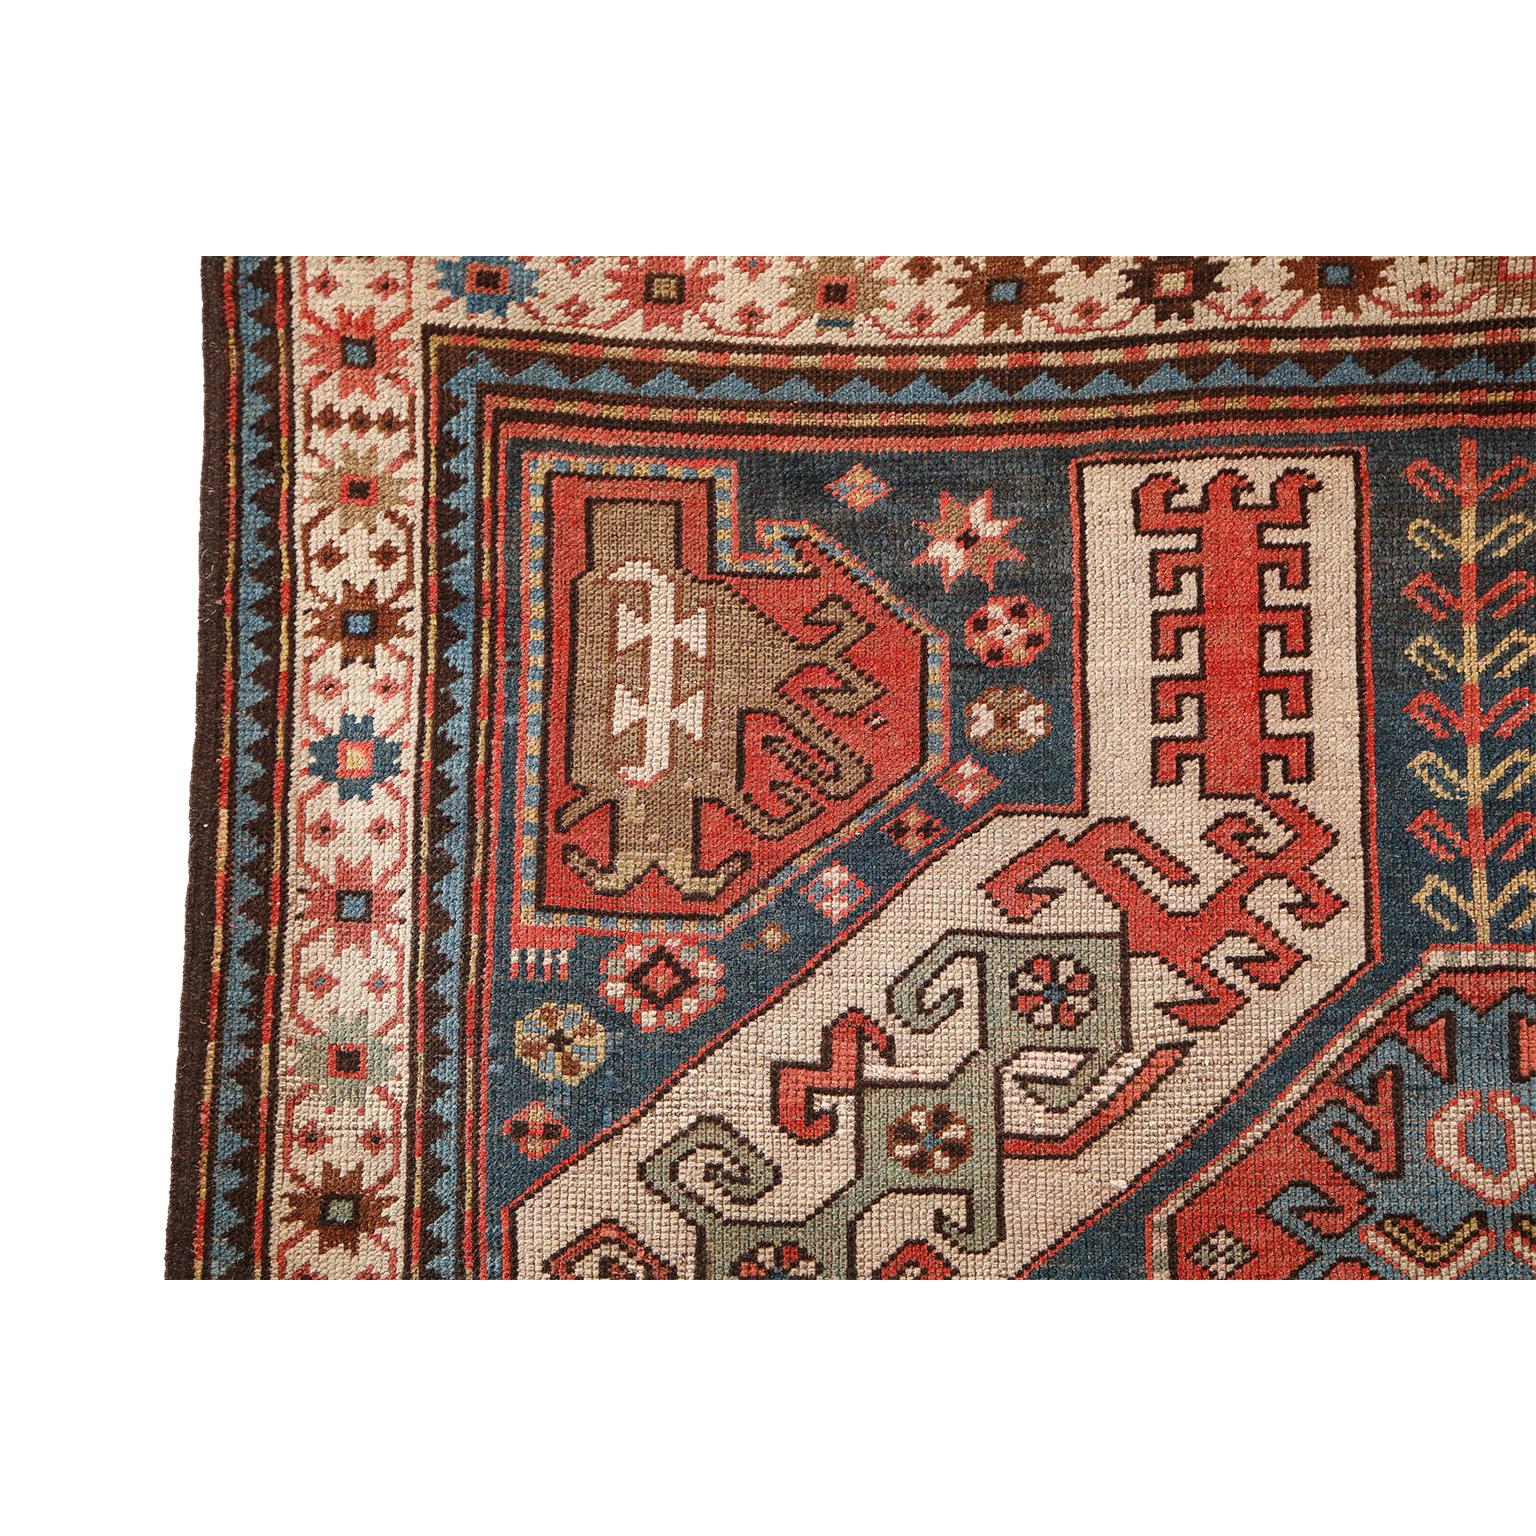 Antique 1880s Caucasian Rug, Hand-knotted Wool, Blue, Green, Red, 4' x 6' For Sale 3